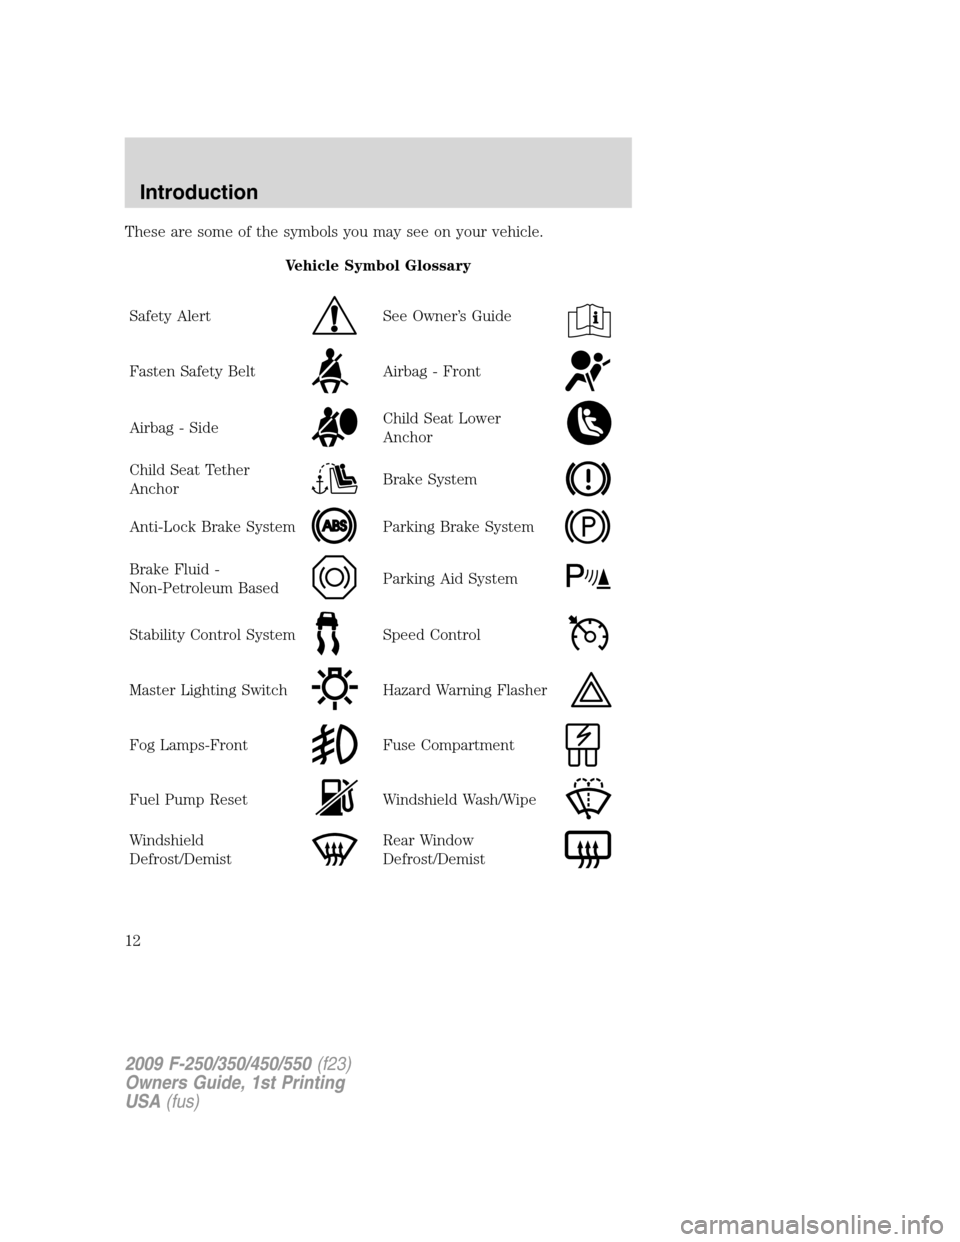 FORD SUPER DUTY 2009 2.G Owners Manual These are some of the symbols you may see on your vehicle.
Vehicle Symbol Glossary
Safety Alert
See Owner’s Guide
Fasten Safety BeltAirbag - Front
Airbag - SideChild Seat Lower
Anchor
Child Seat Tet